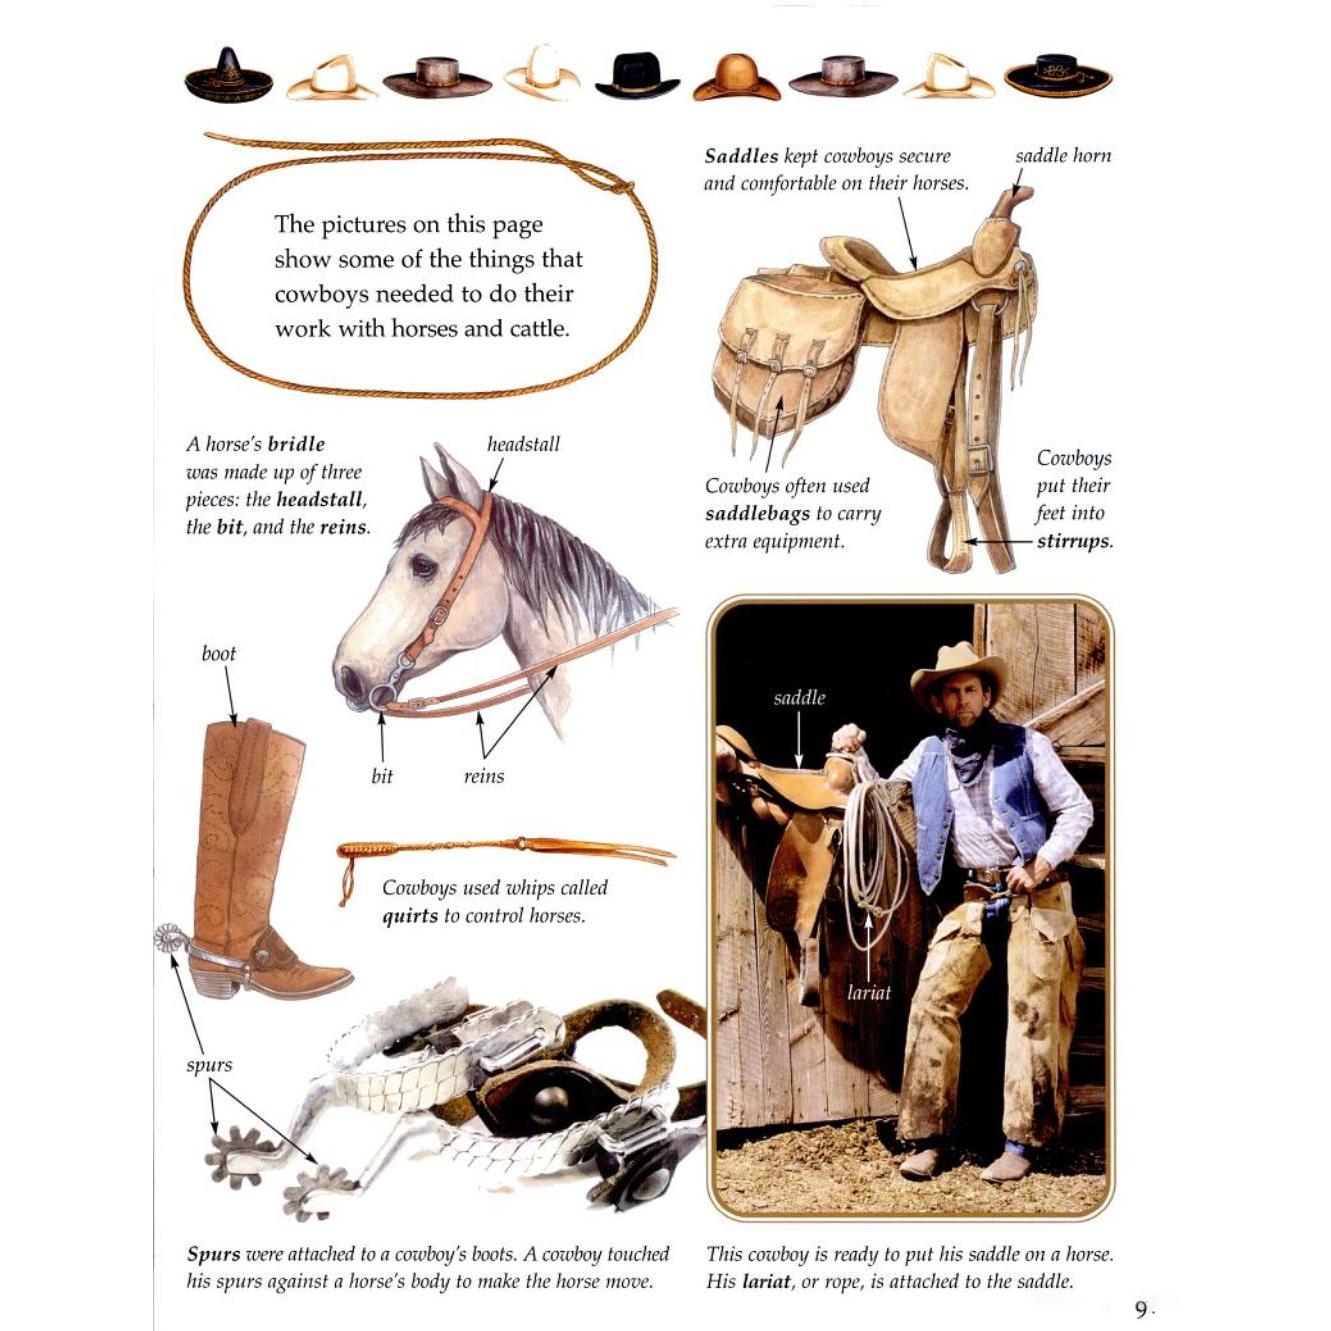 A Visual Dictionary of the Old West by Bobbie Kalman